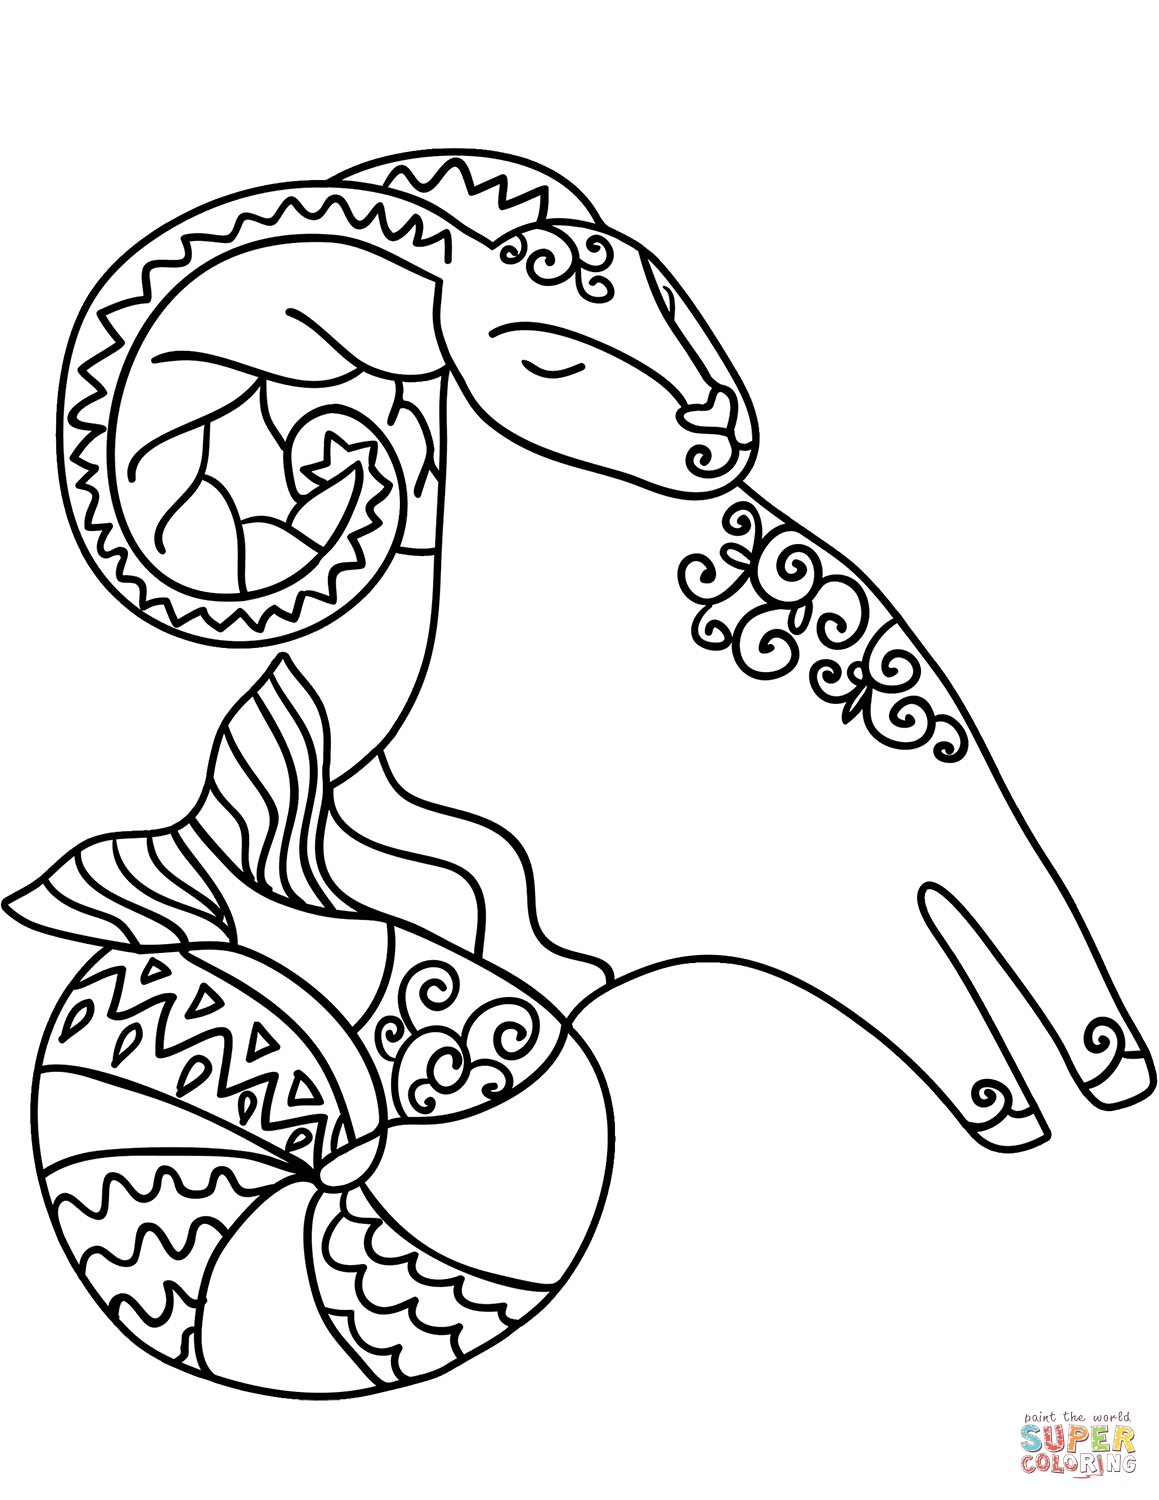 Capricorn zodiac sign coloring page | Free Printable Coloring Pages